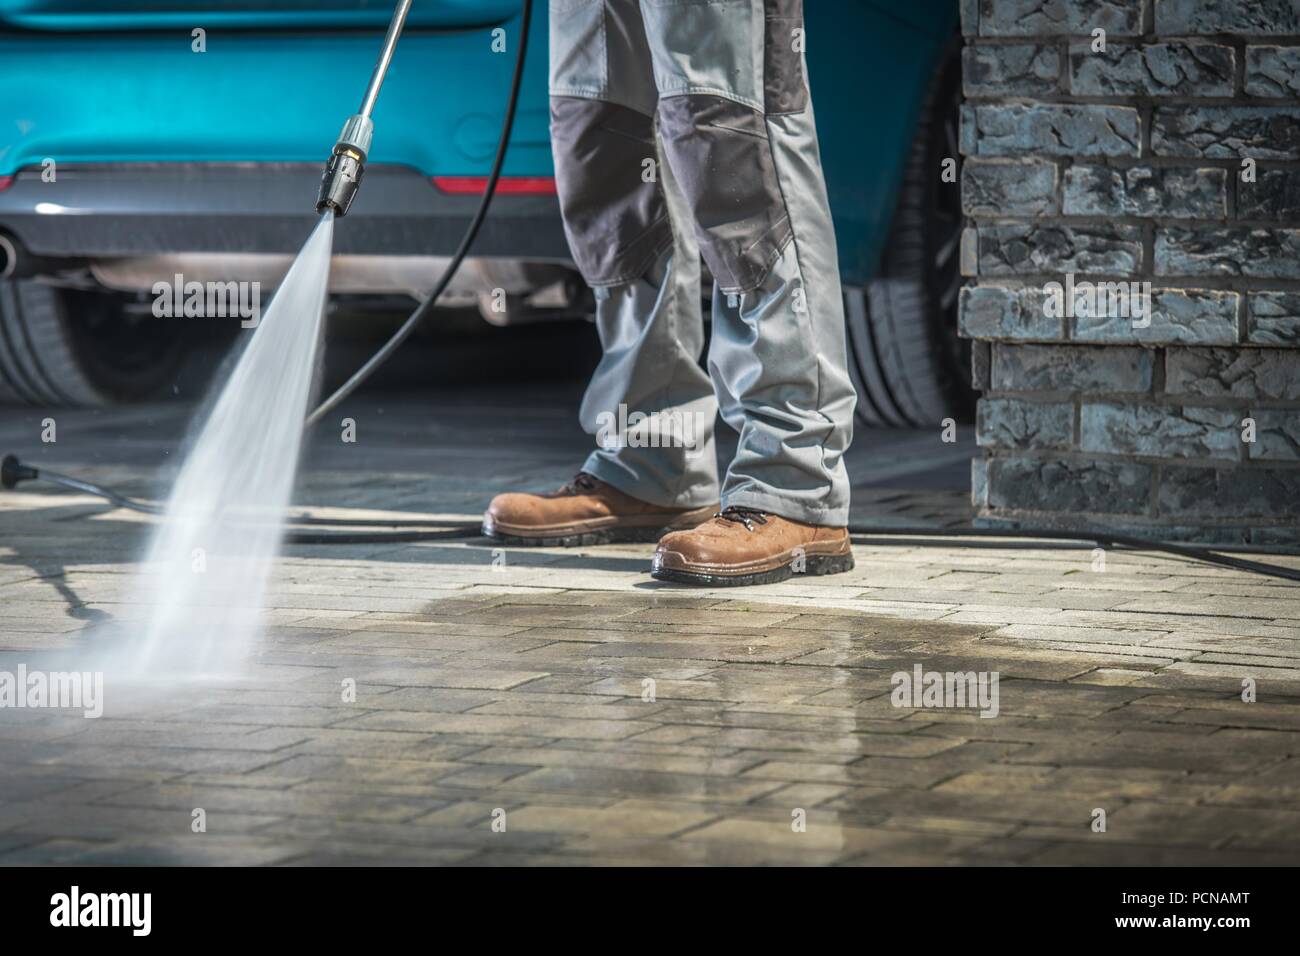 Cobble Stone Driveway Cleaning Using Pressure Washer with Concrete Cleaning Detergent. Closeup Photo. Stock Photo